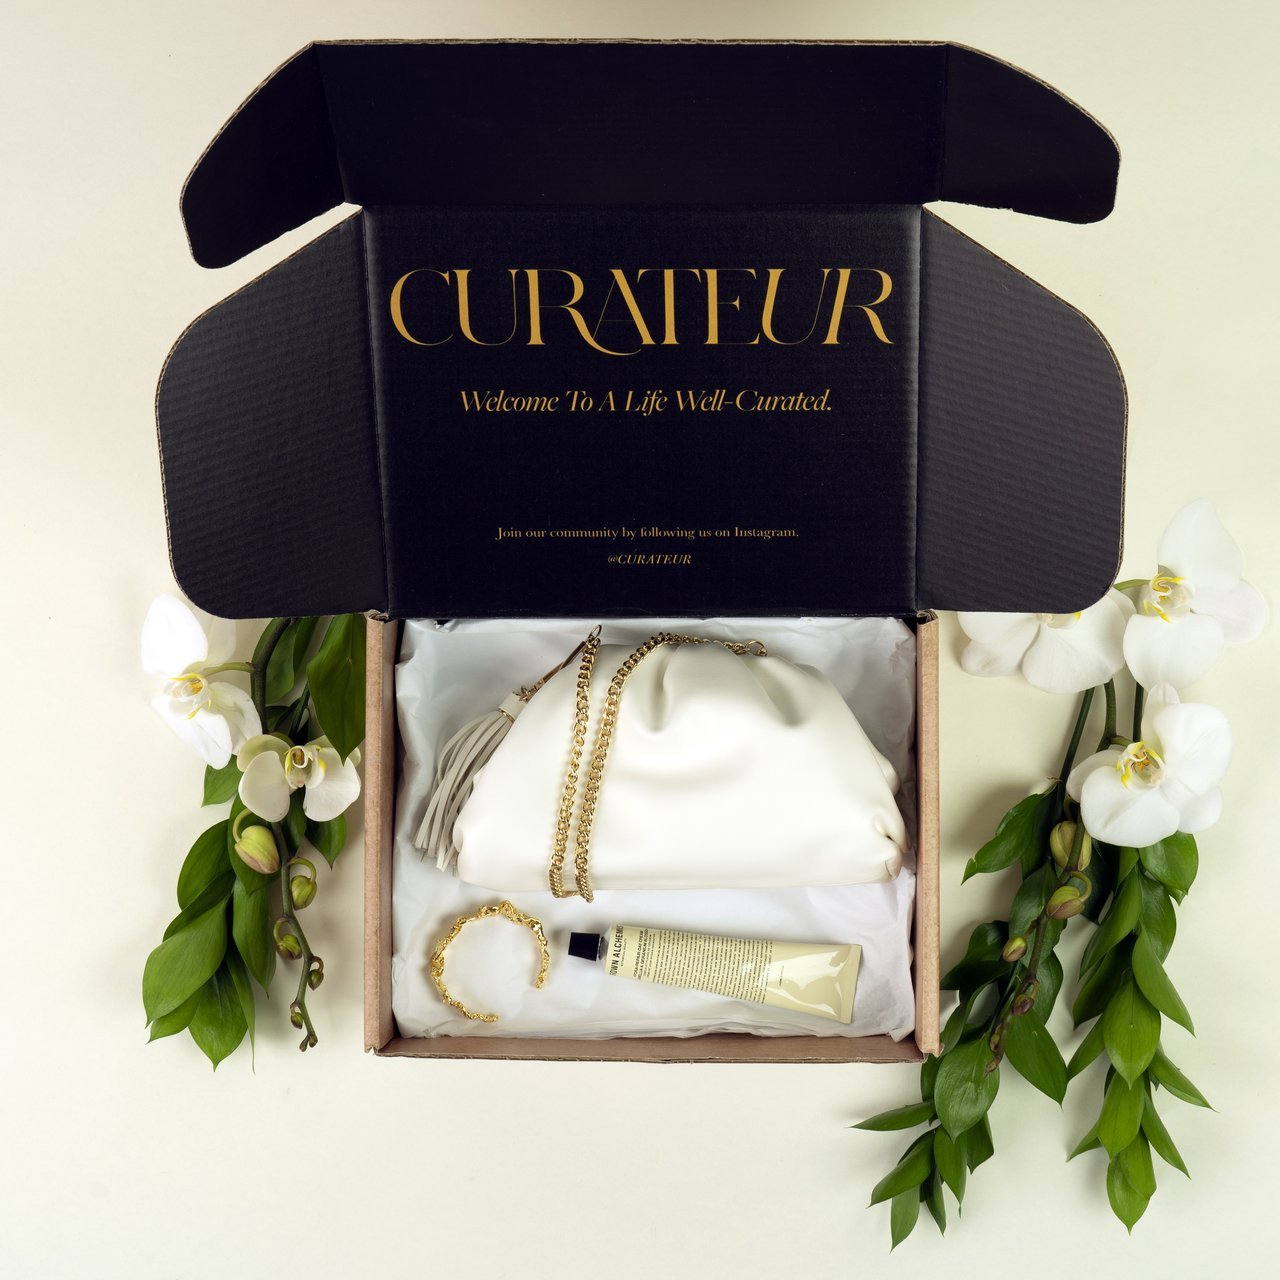 CURATEUR Spring 2021 Welcome Box – Available Now